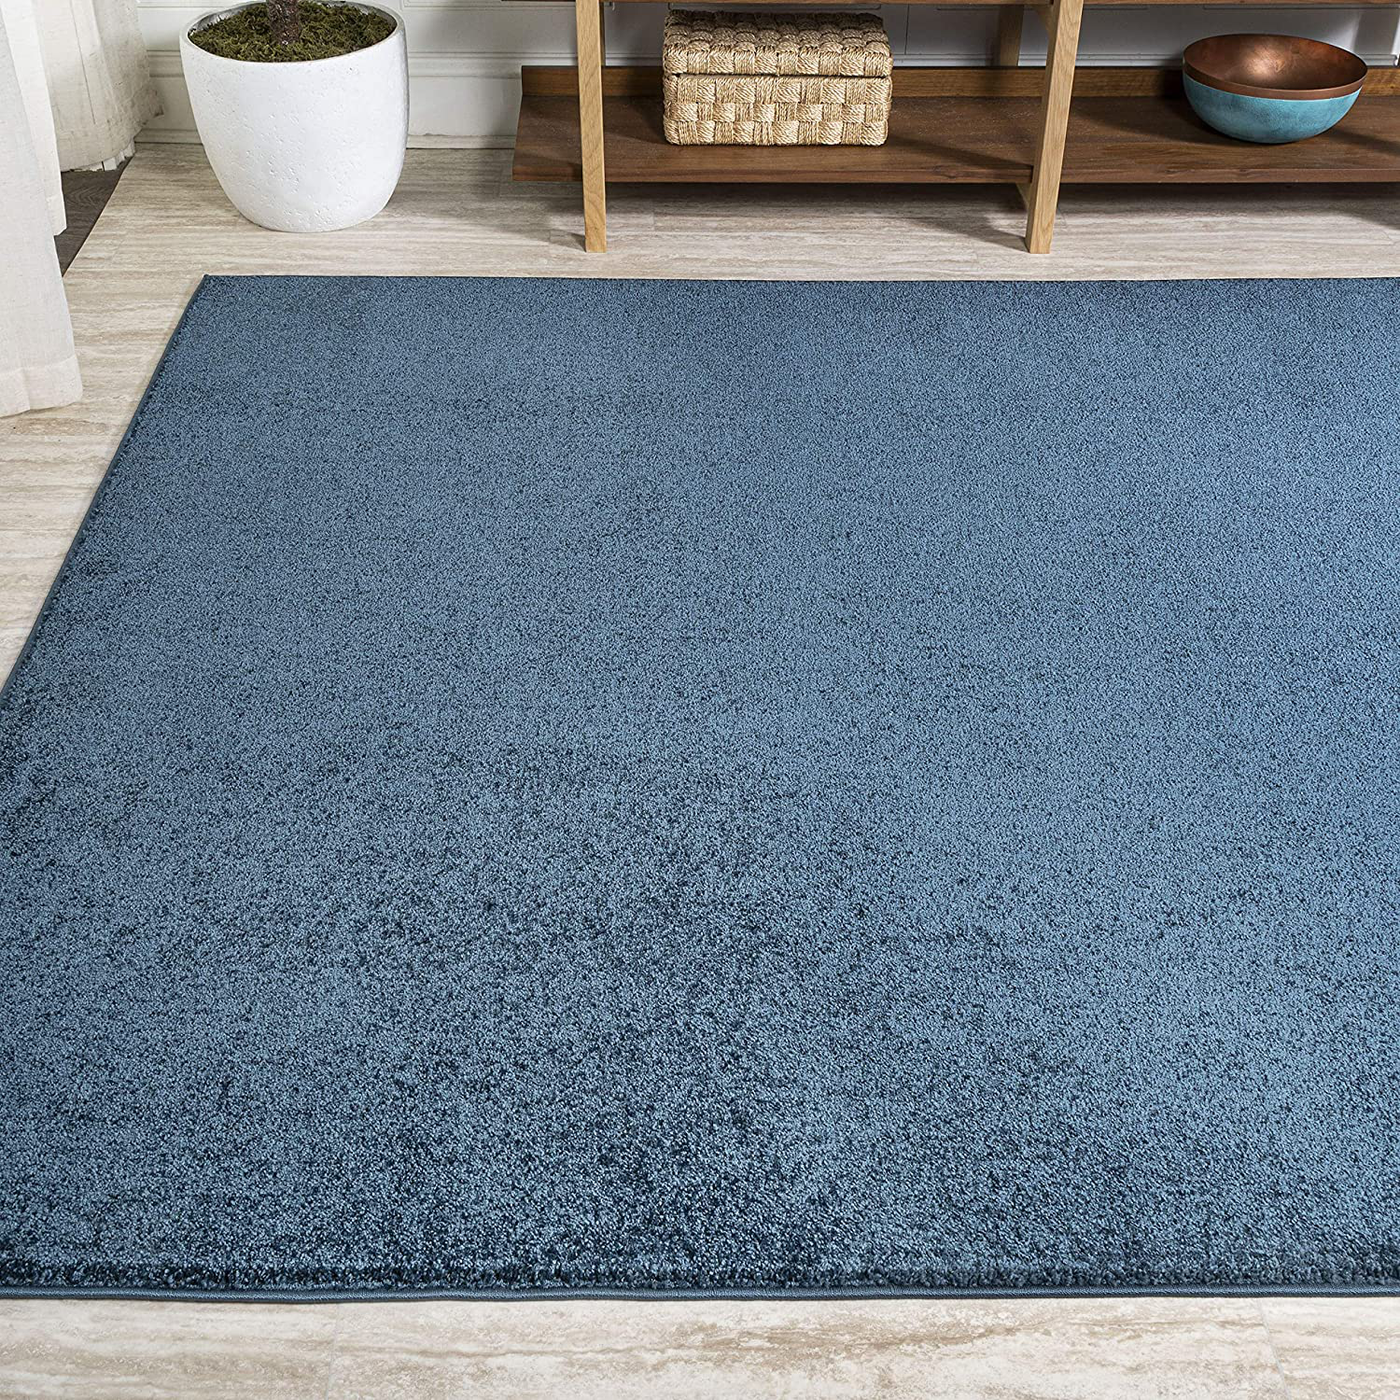 JONATHAN Y Haze Solid Low-Pile Turquoise 5 ft. x 8 ft. Area Rug, Casual,Contemporary,Solid,Traditional,EasyCleaning,Bedroom,LivingRoom, Non Shedding